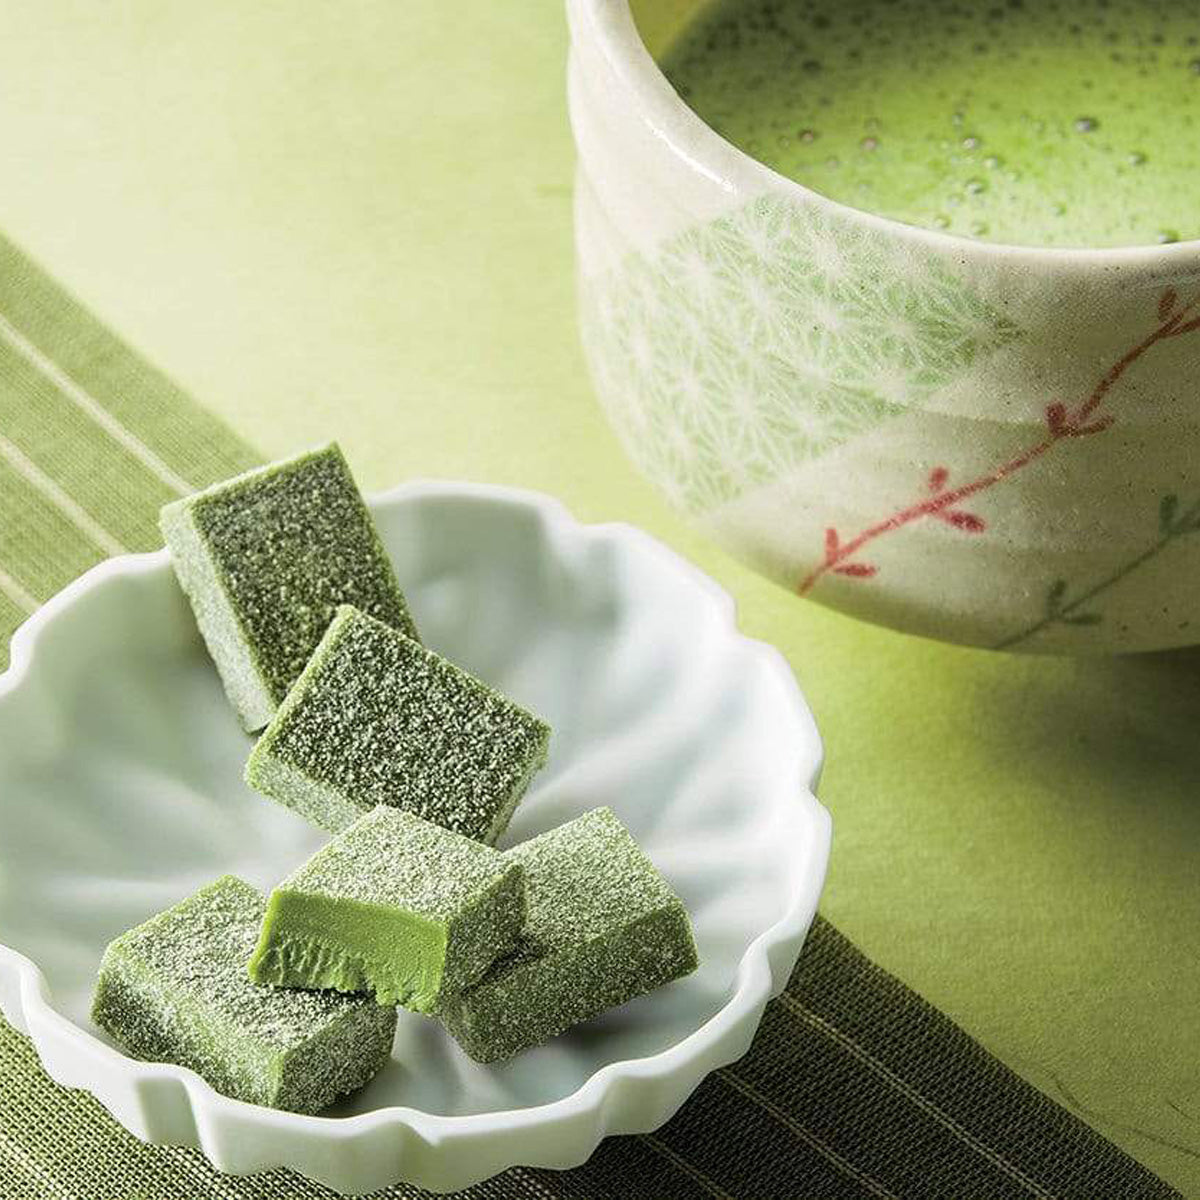 ROYCE' Chocolate - Nama Chocolate "Matcha" - Image shows green blocks of chocolates on a flower-shaped plate. Accents include a green placemat and a tea cup with floral prints, as filled with green tea.